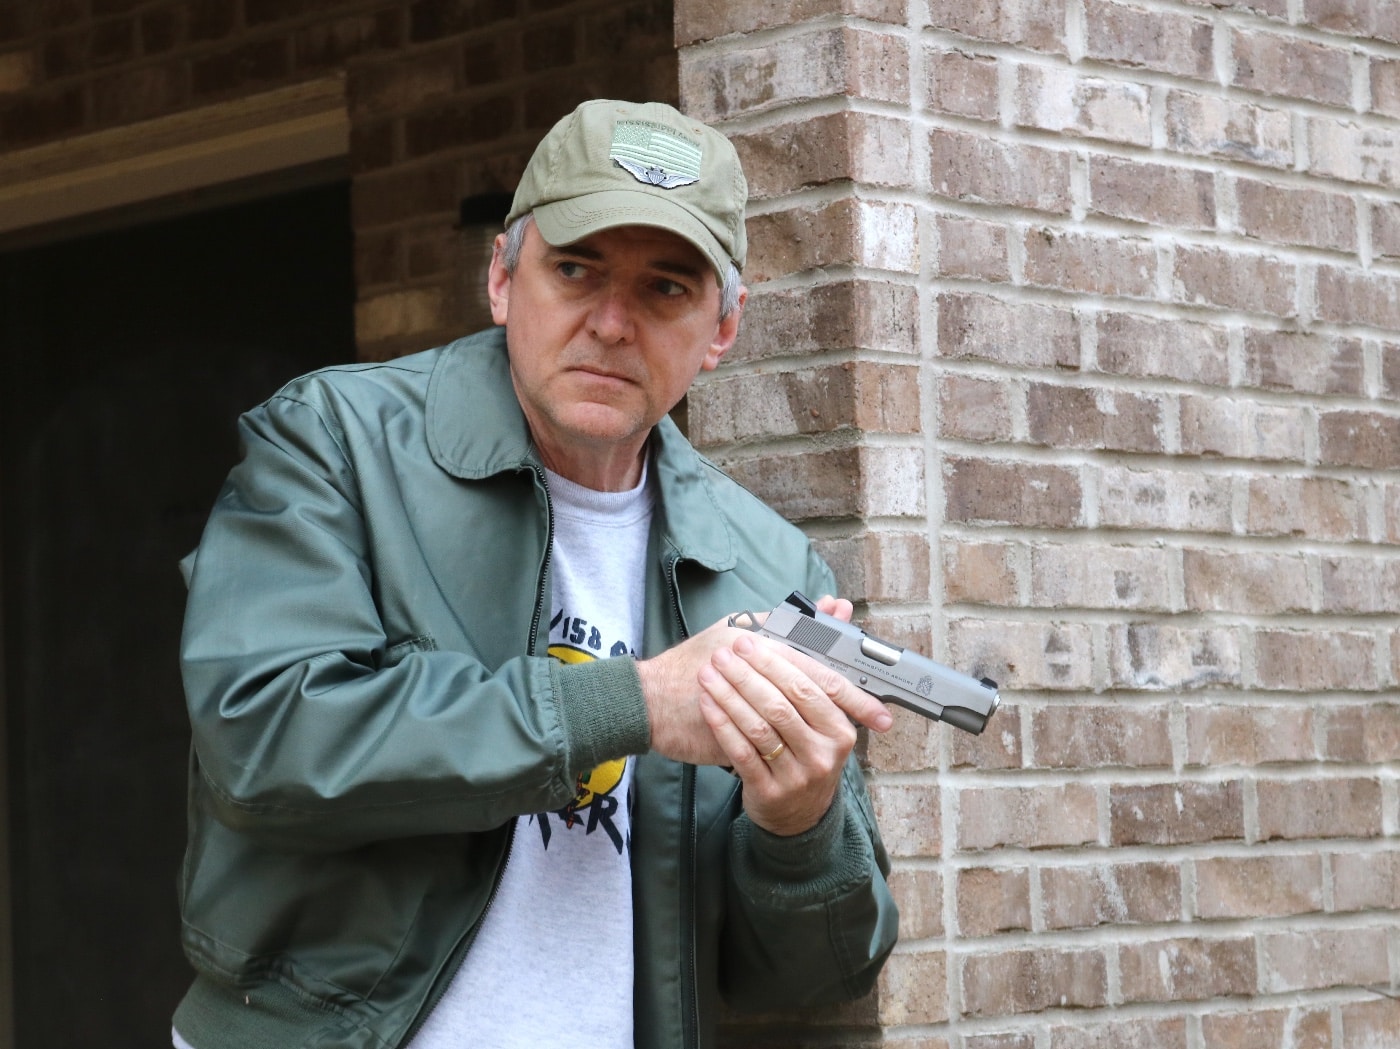 In this picture, the author is shown testing the Springfield Armory Garrison 4.25" M1911 pistol. This one is chambered in 9×19mm Parabellum. The 9×19mm Parabellum is a rimless, tapered firearms cartridge.